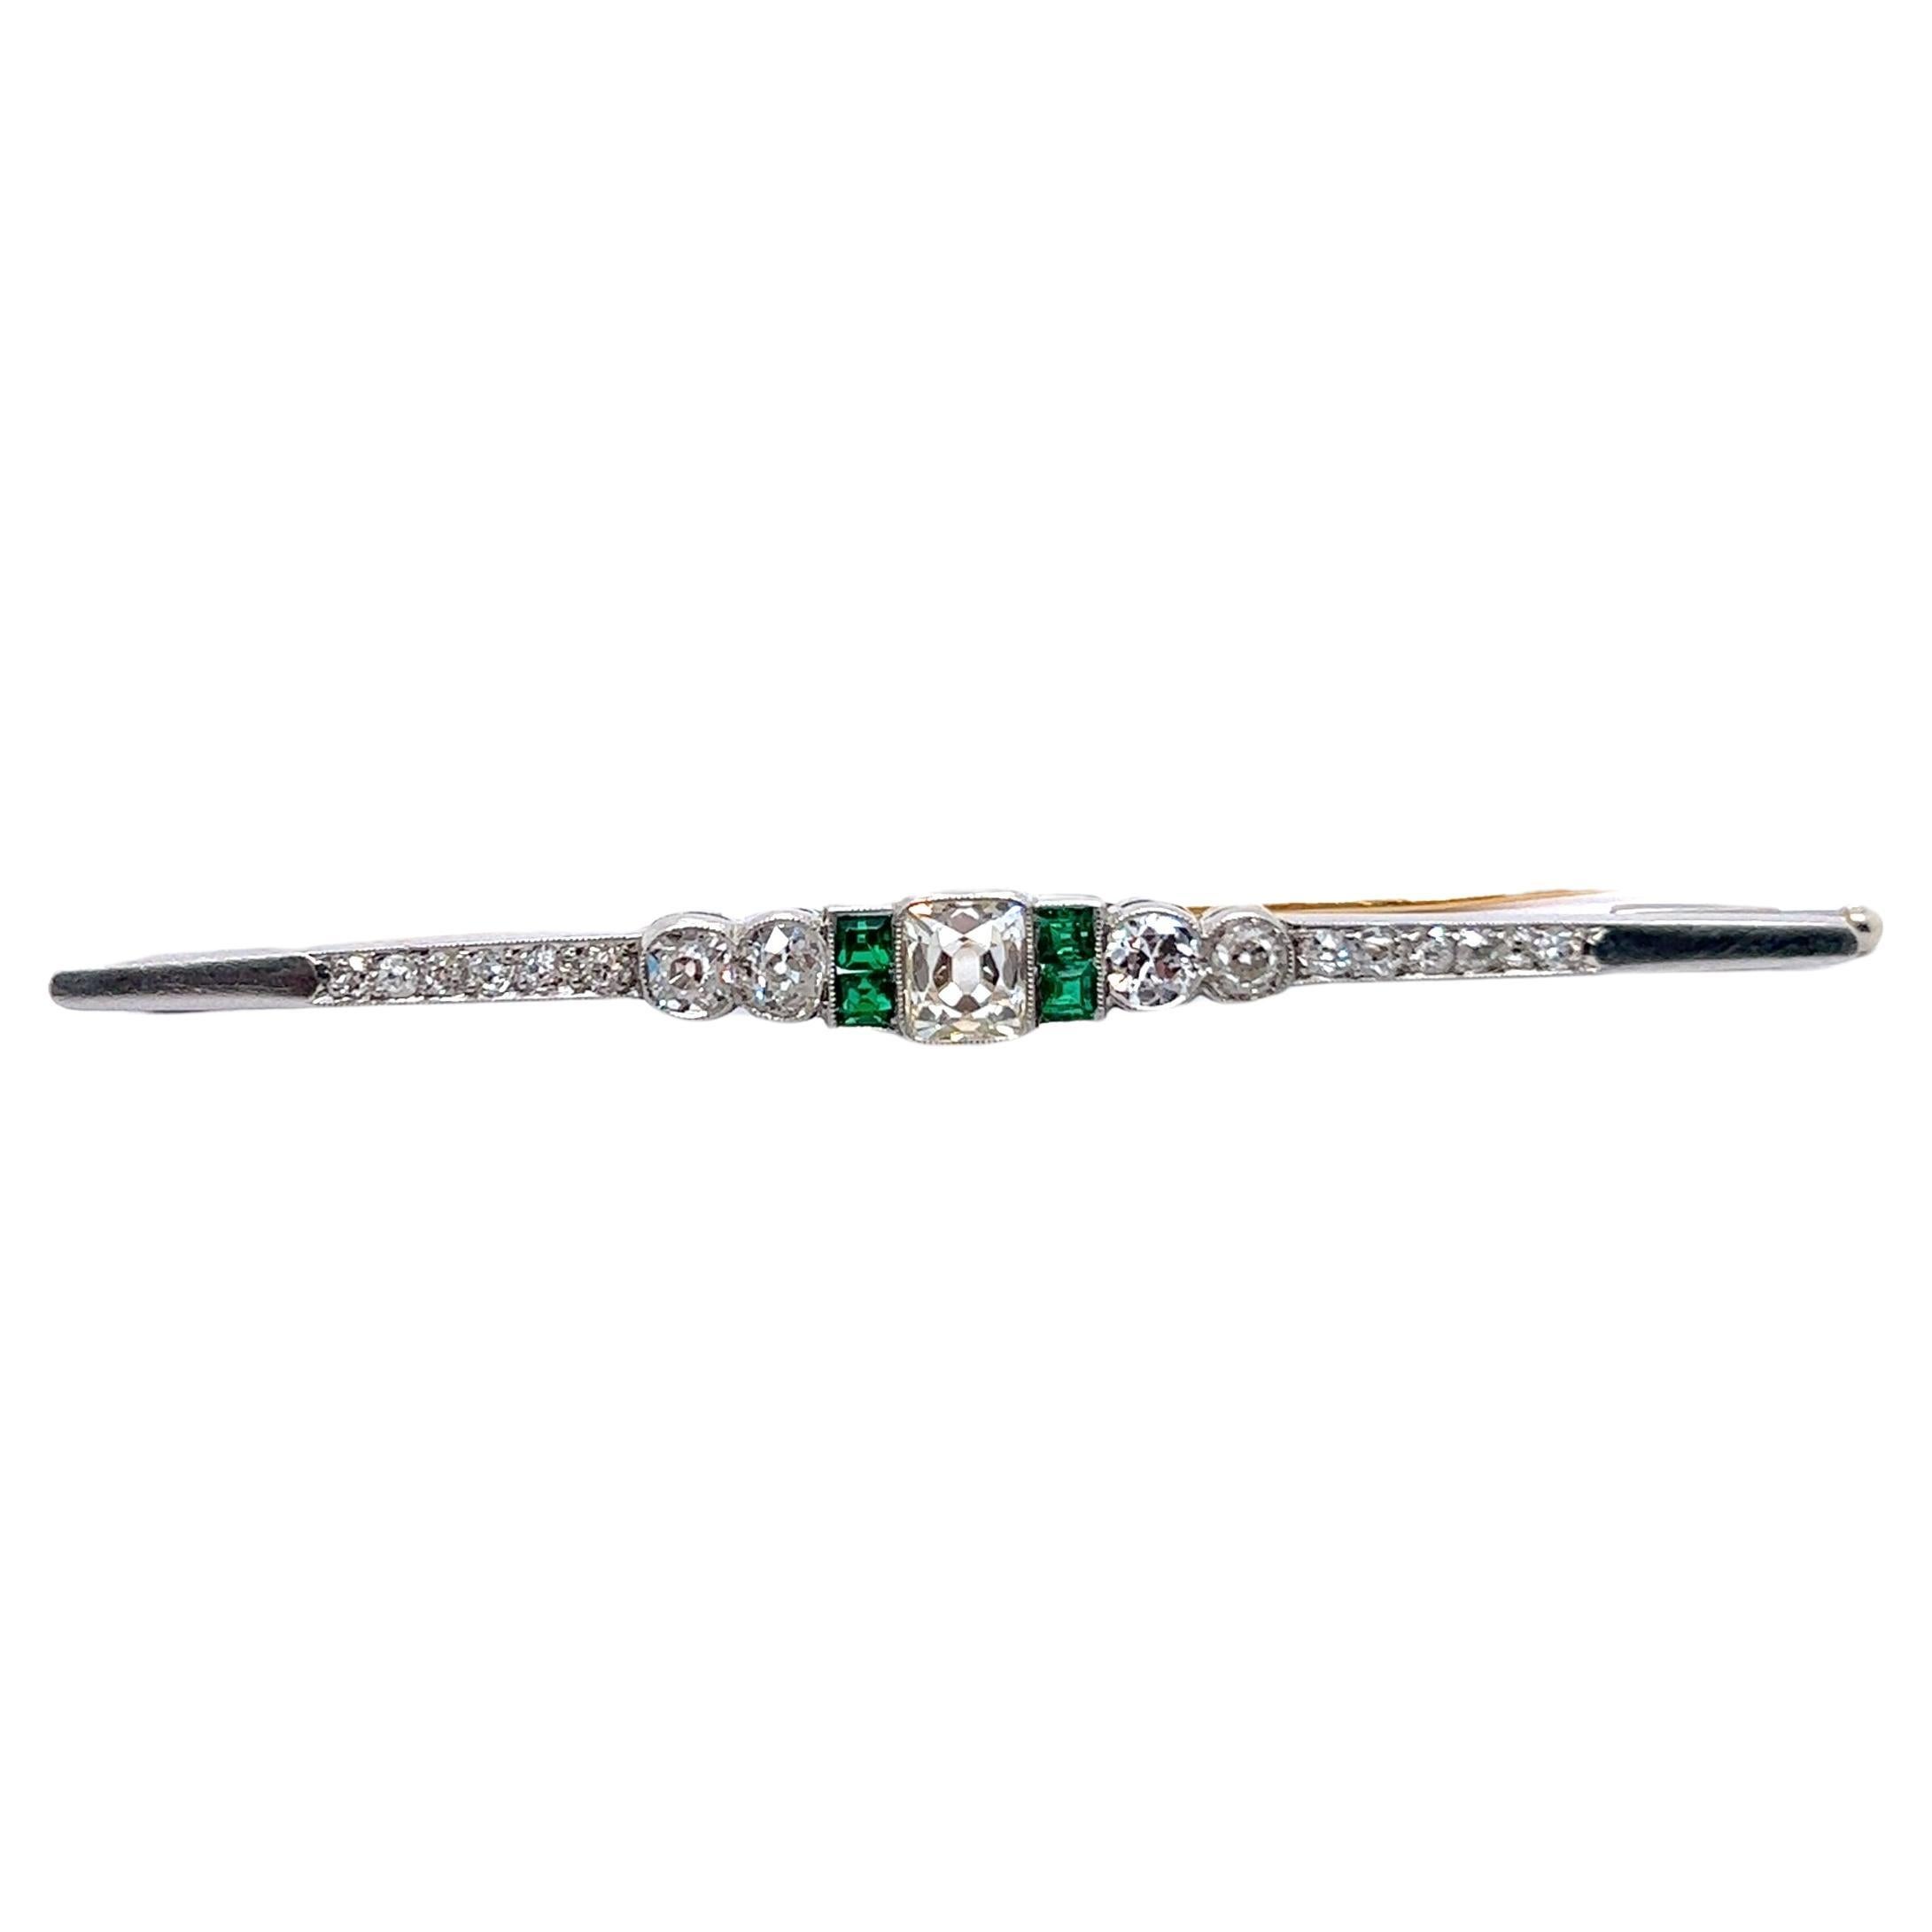 Art Deco Brooch with Old Cut Diamonds and Emeralds in 18 Karat Gold